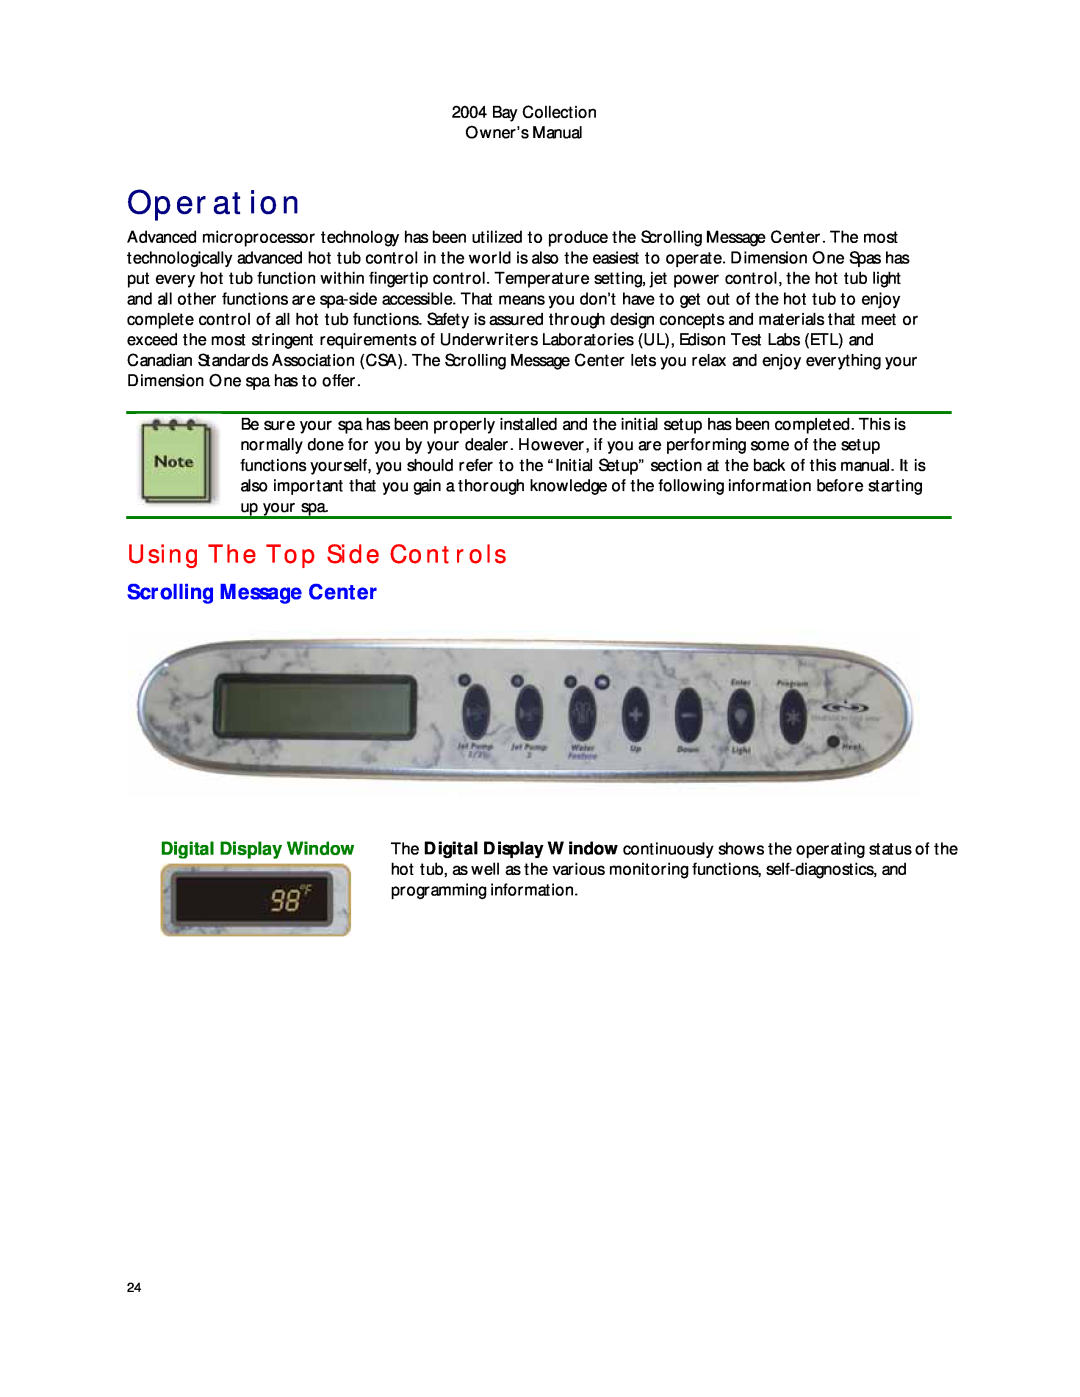 Dimension One Spas Bay Collection manual Operation, Using The Top Side Controls, Scrolling Message Center 